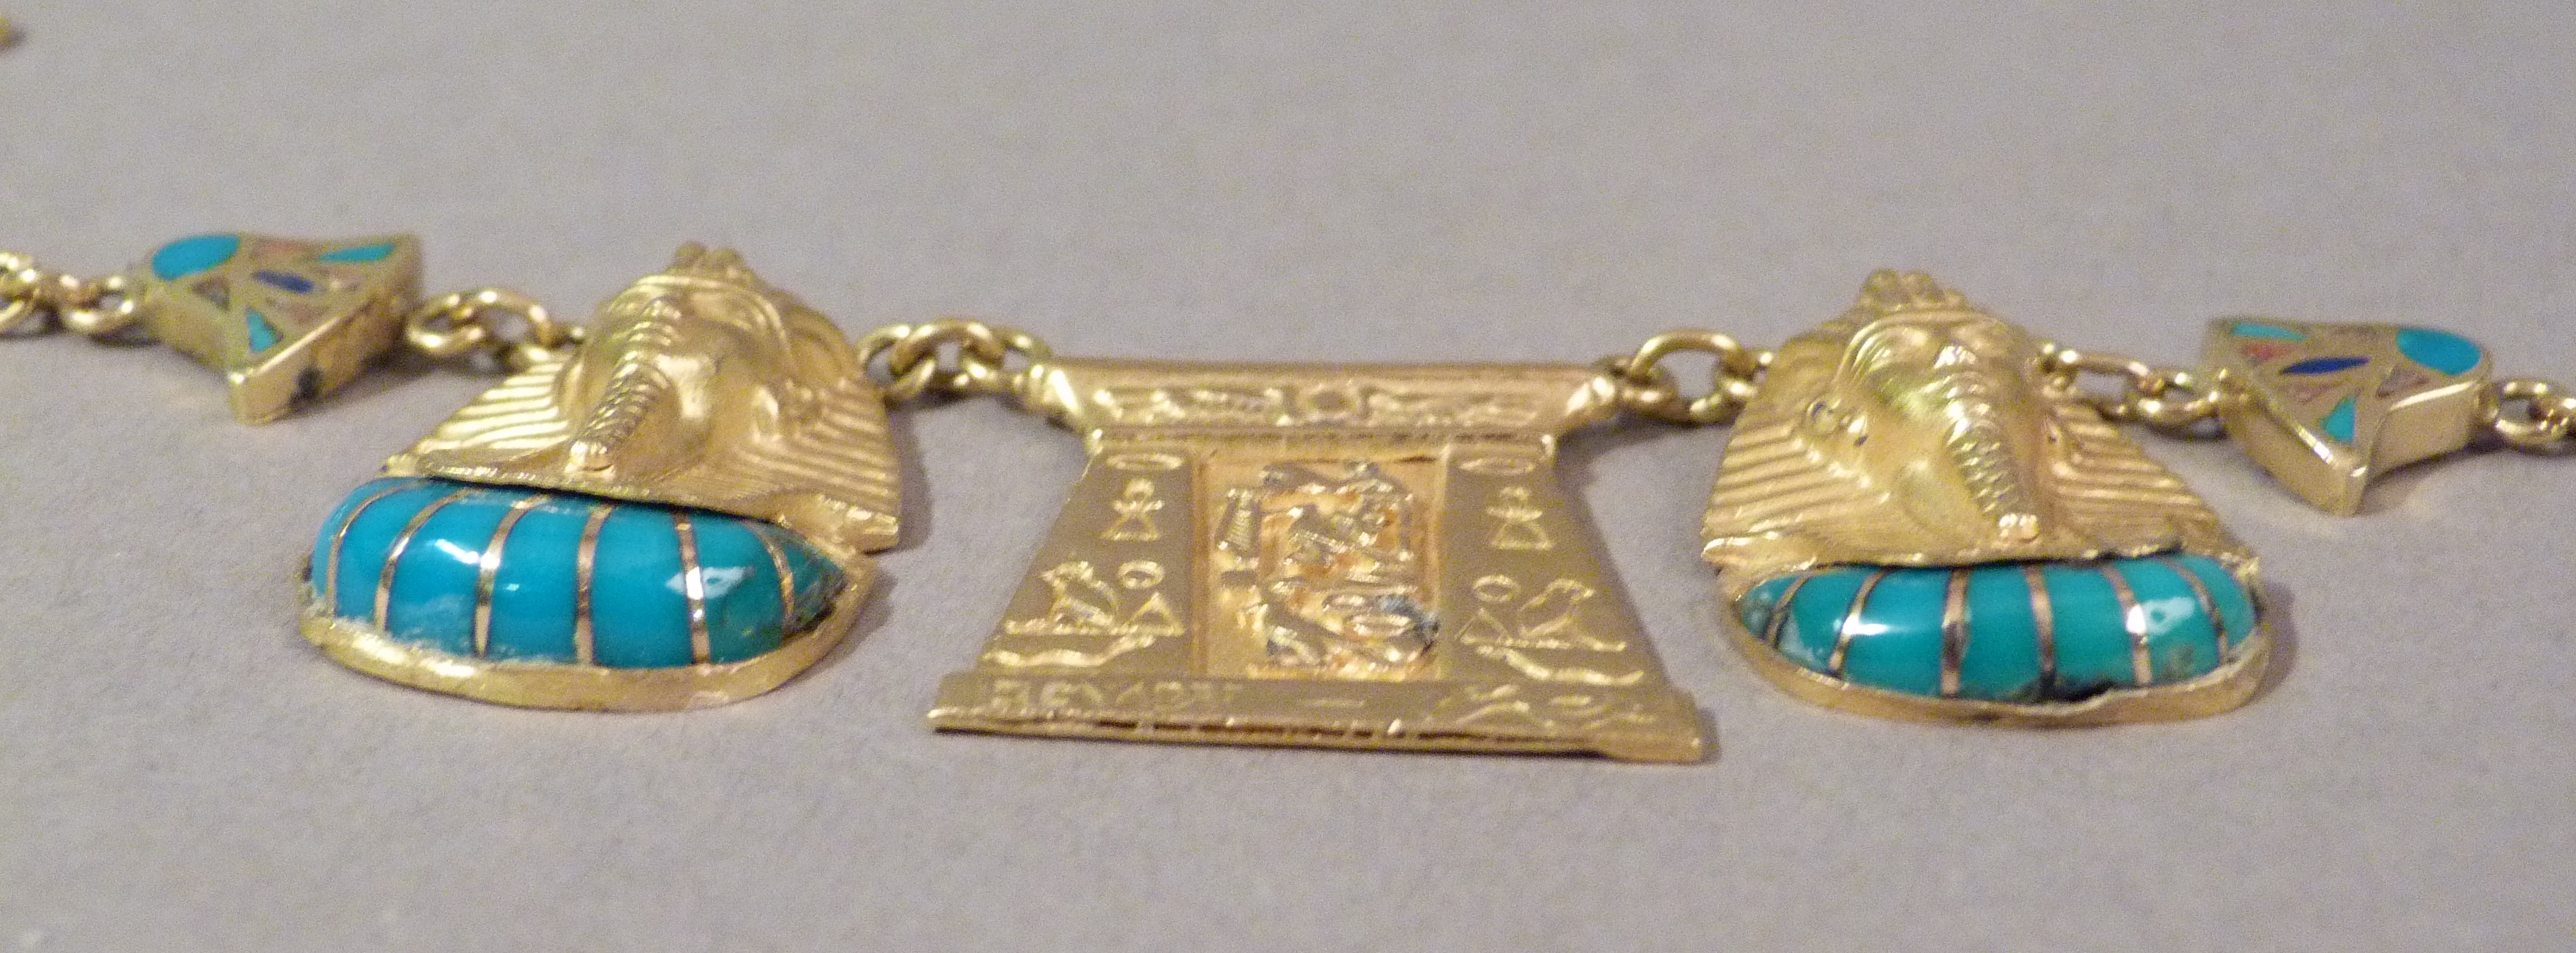 AN EGYPTIAN NECKLACE, the pharoesque pendants set with turquoise and coral inlay hung on a Byzantine - Image 2 of 3